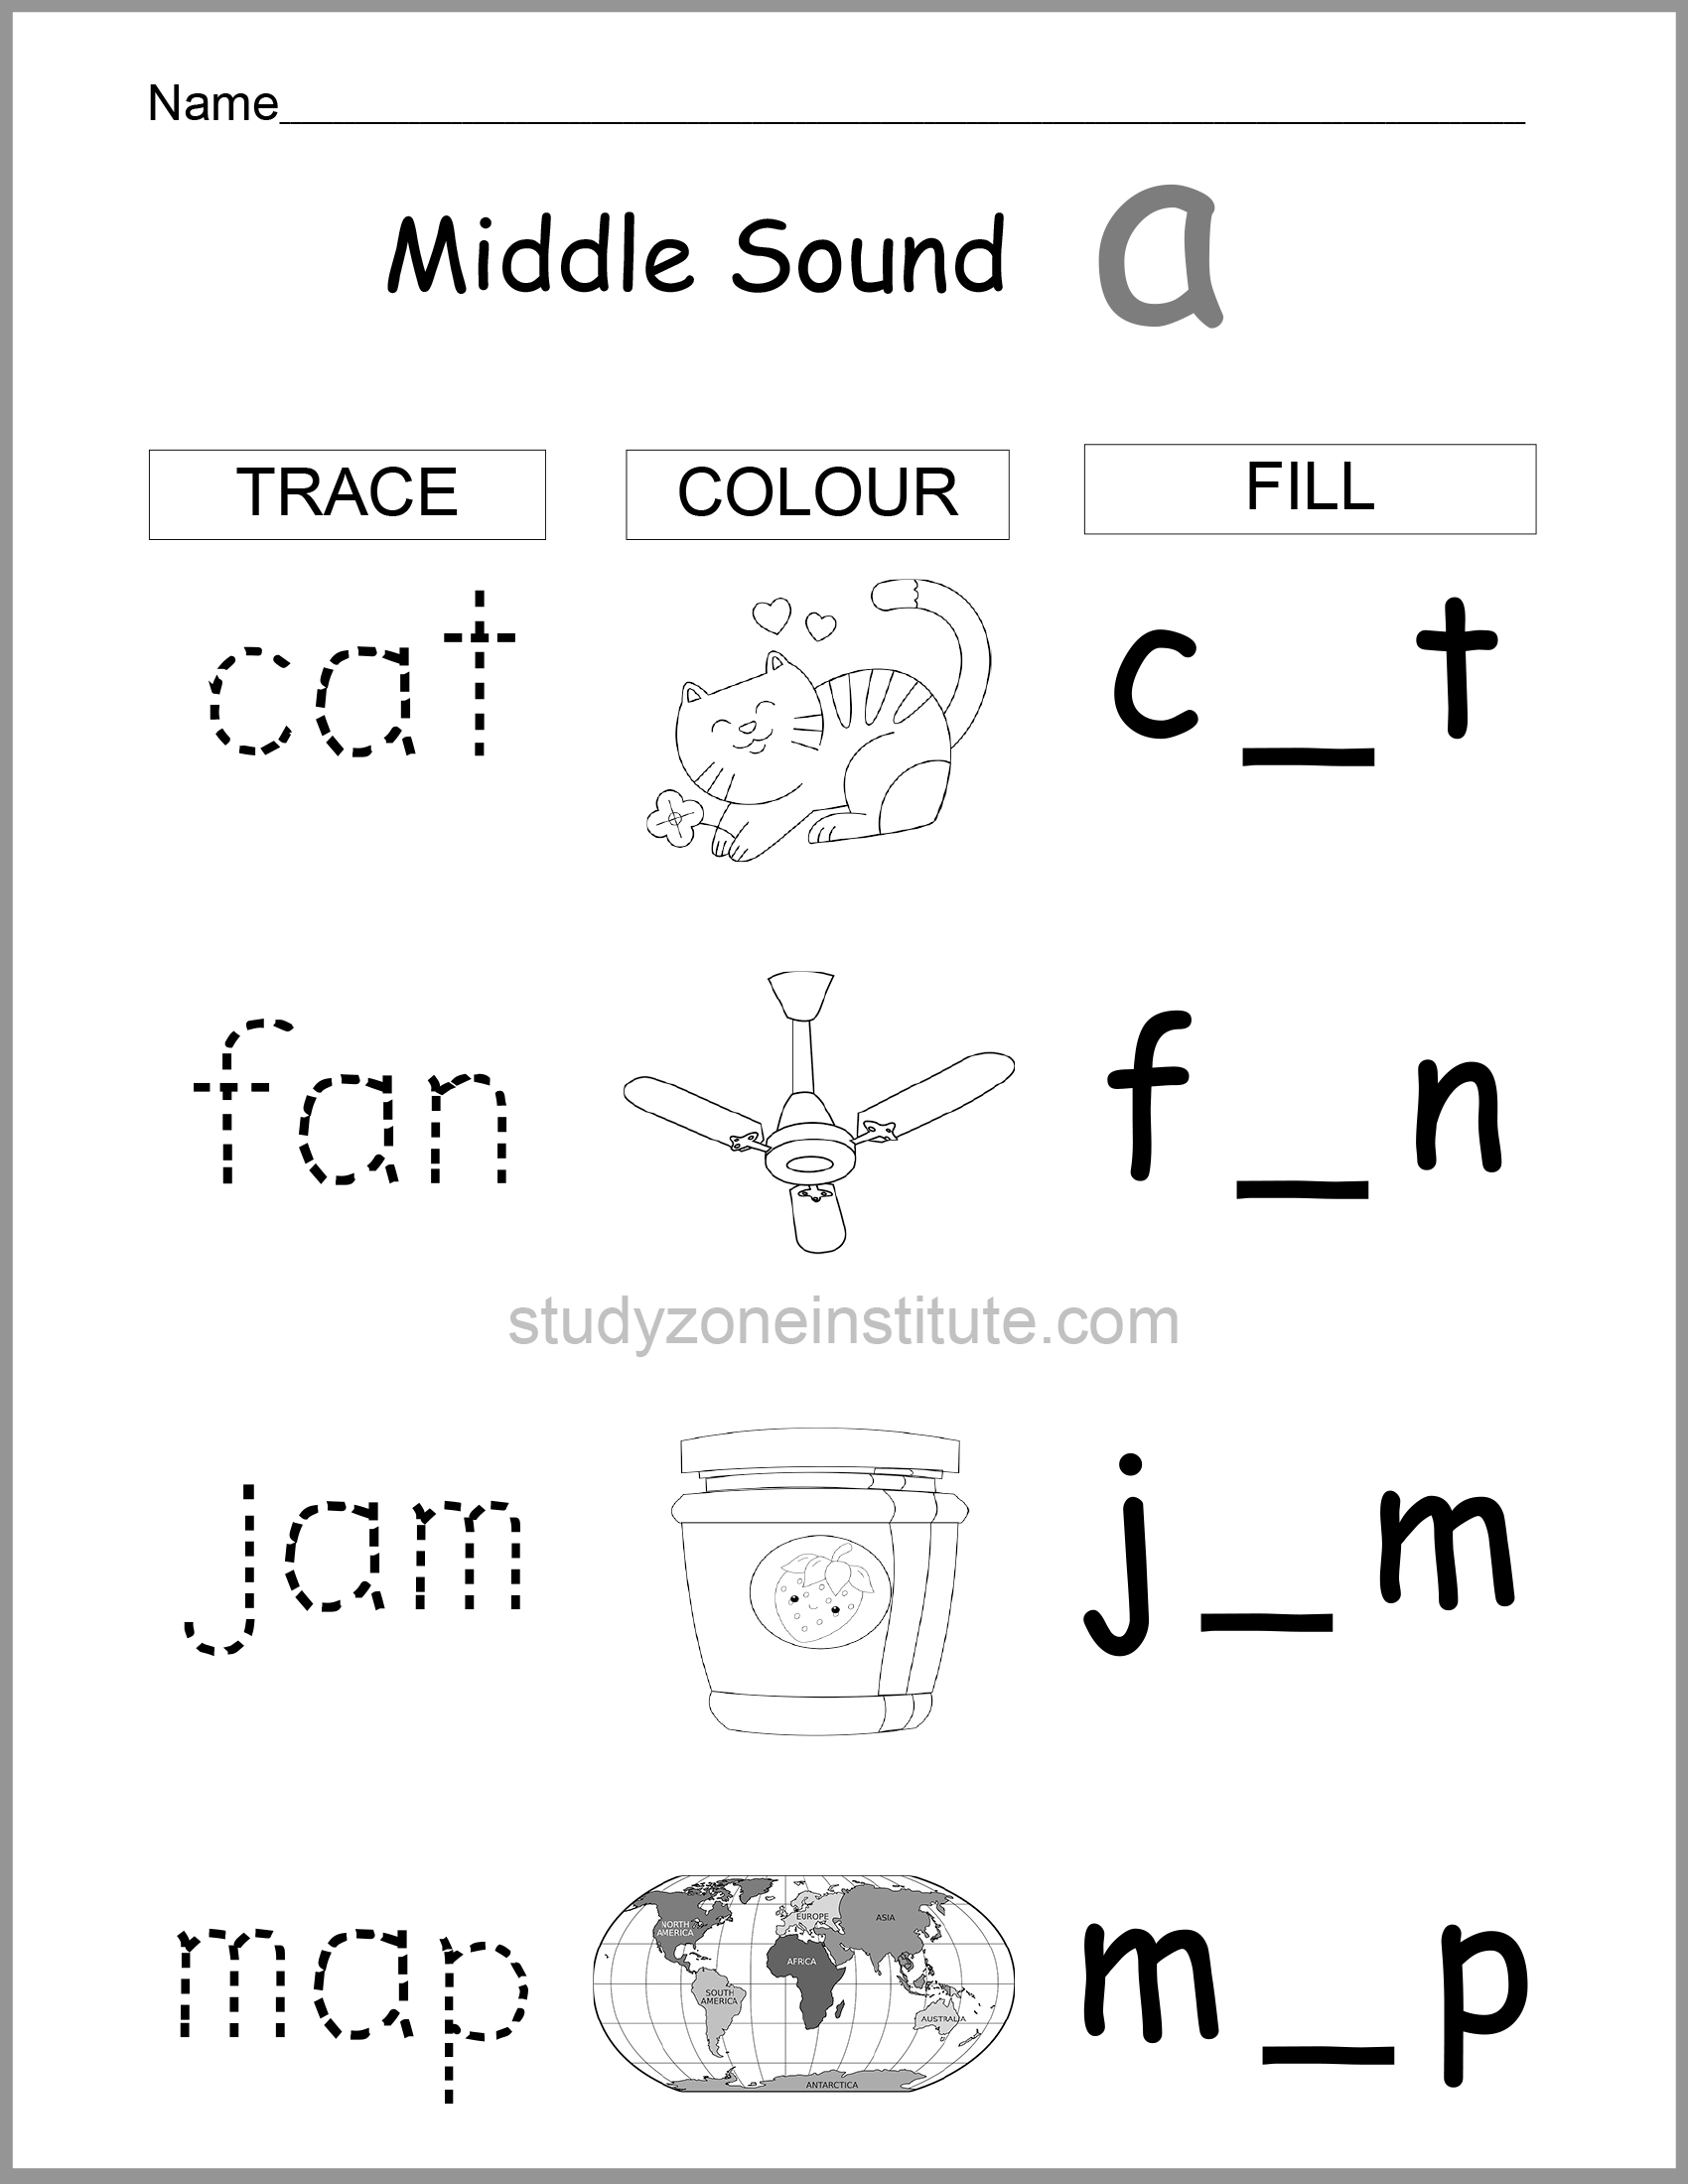 Middle sound a